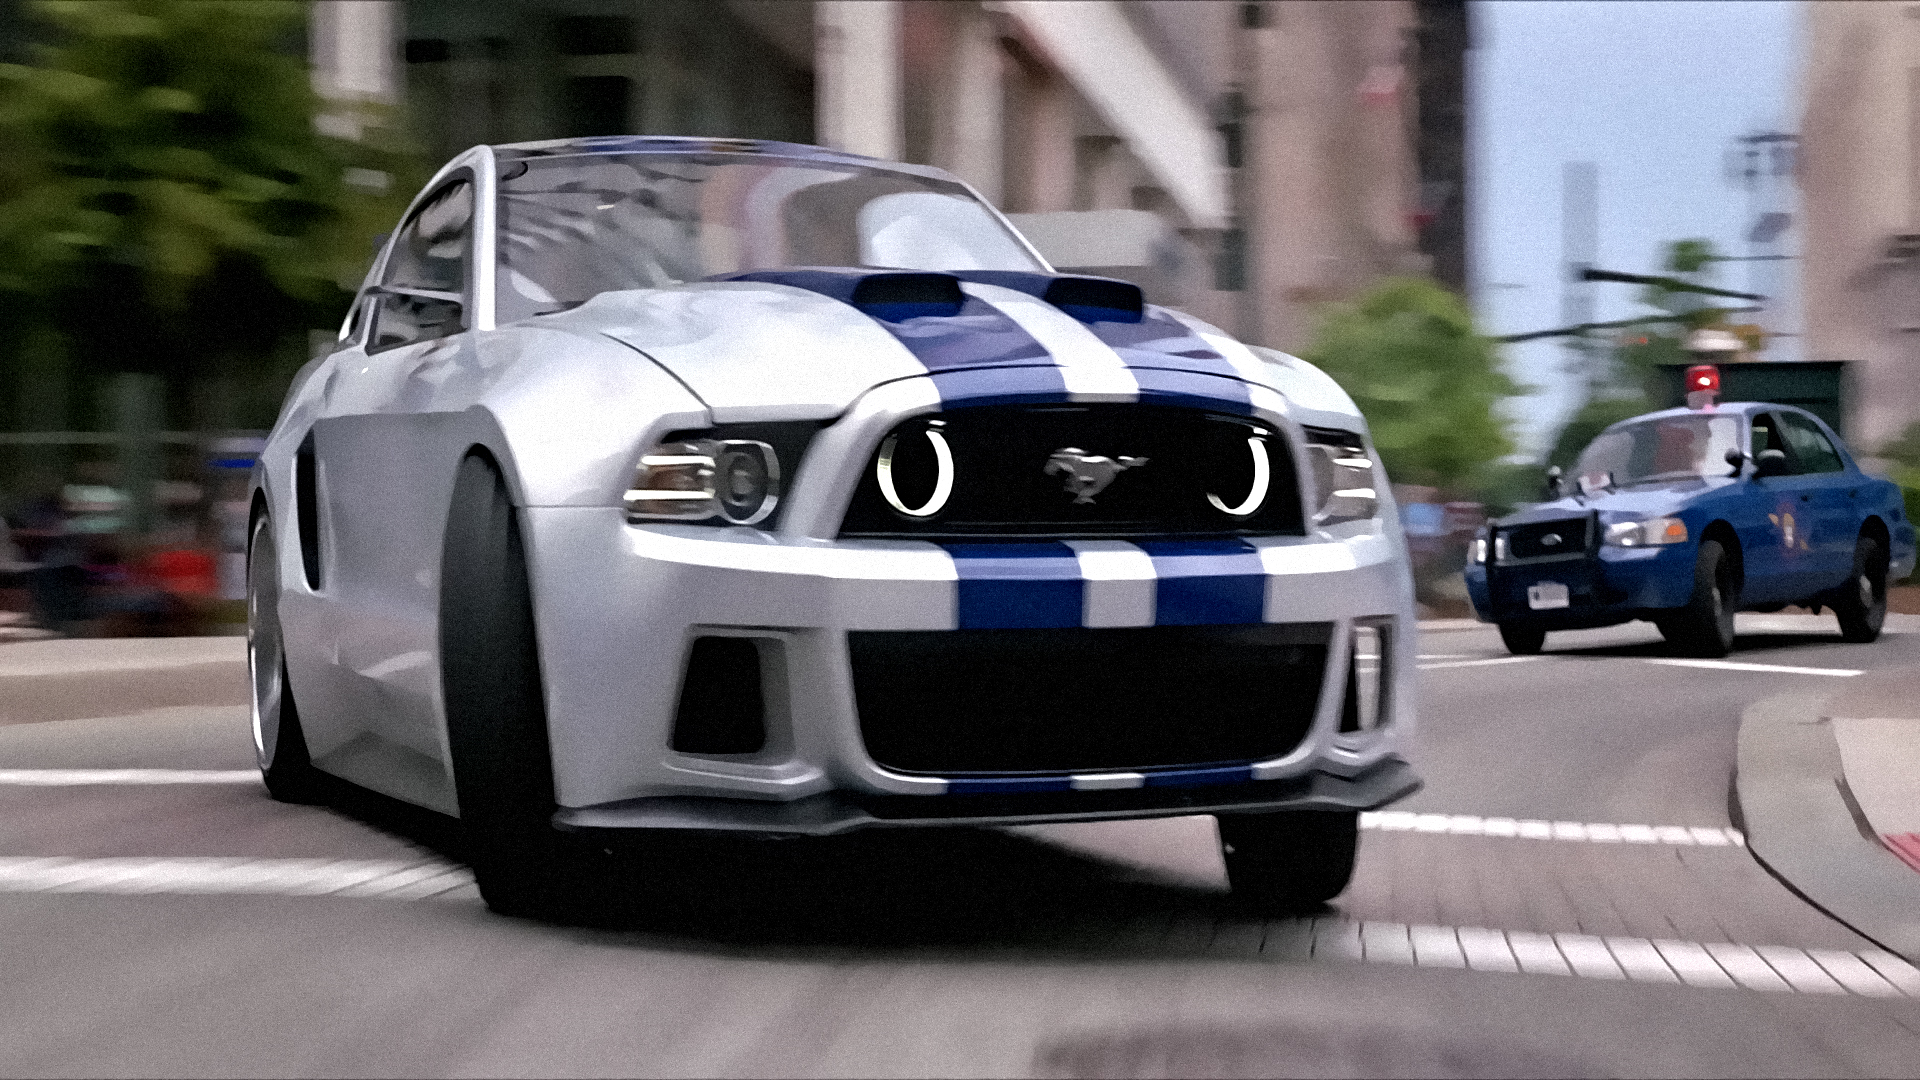 Скорость форд мустанг. Ford Mustang NFS. Ford Mustang Shelby gt500 NFS. Форд Мустанг жажда скорости. Форд Мустанг нфс жажда скорости.